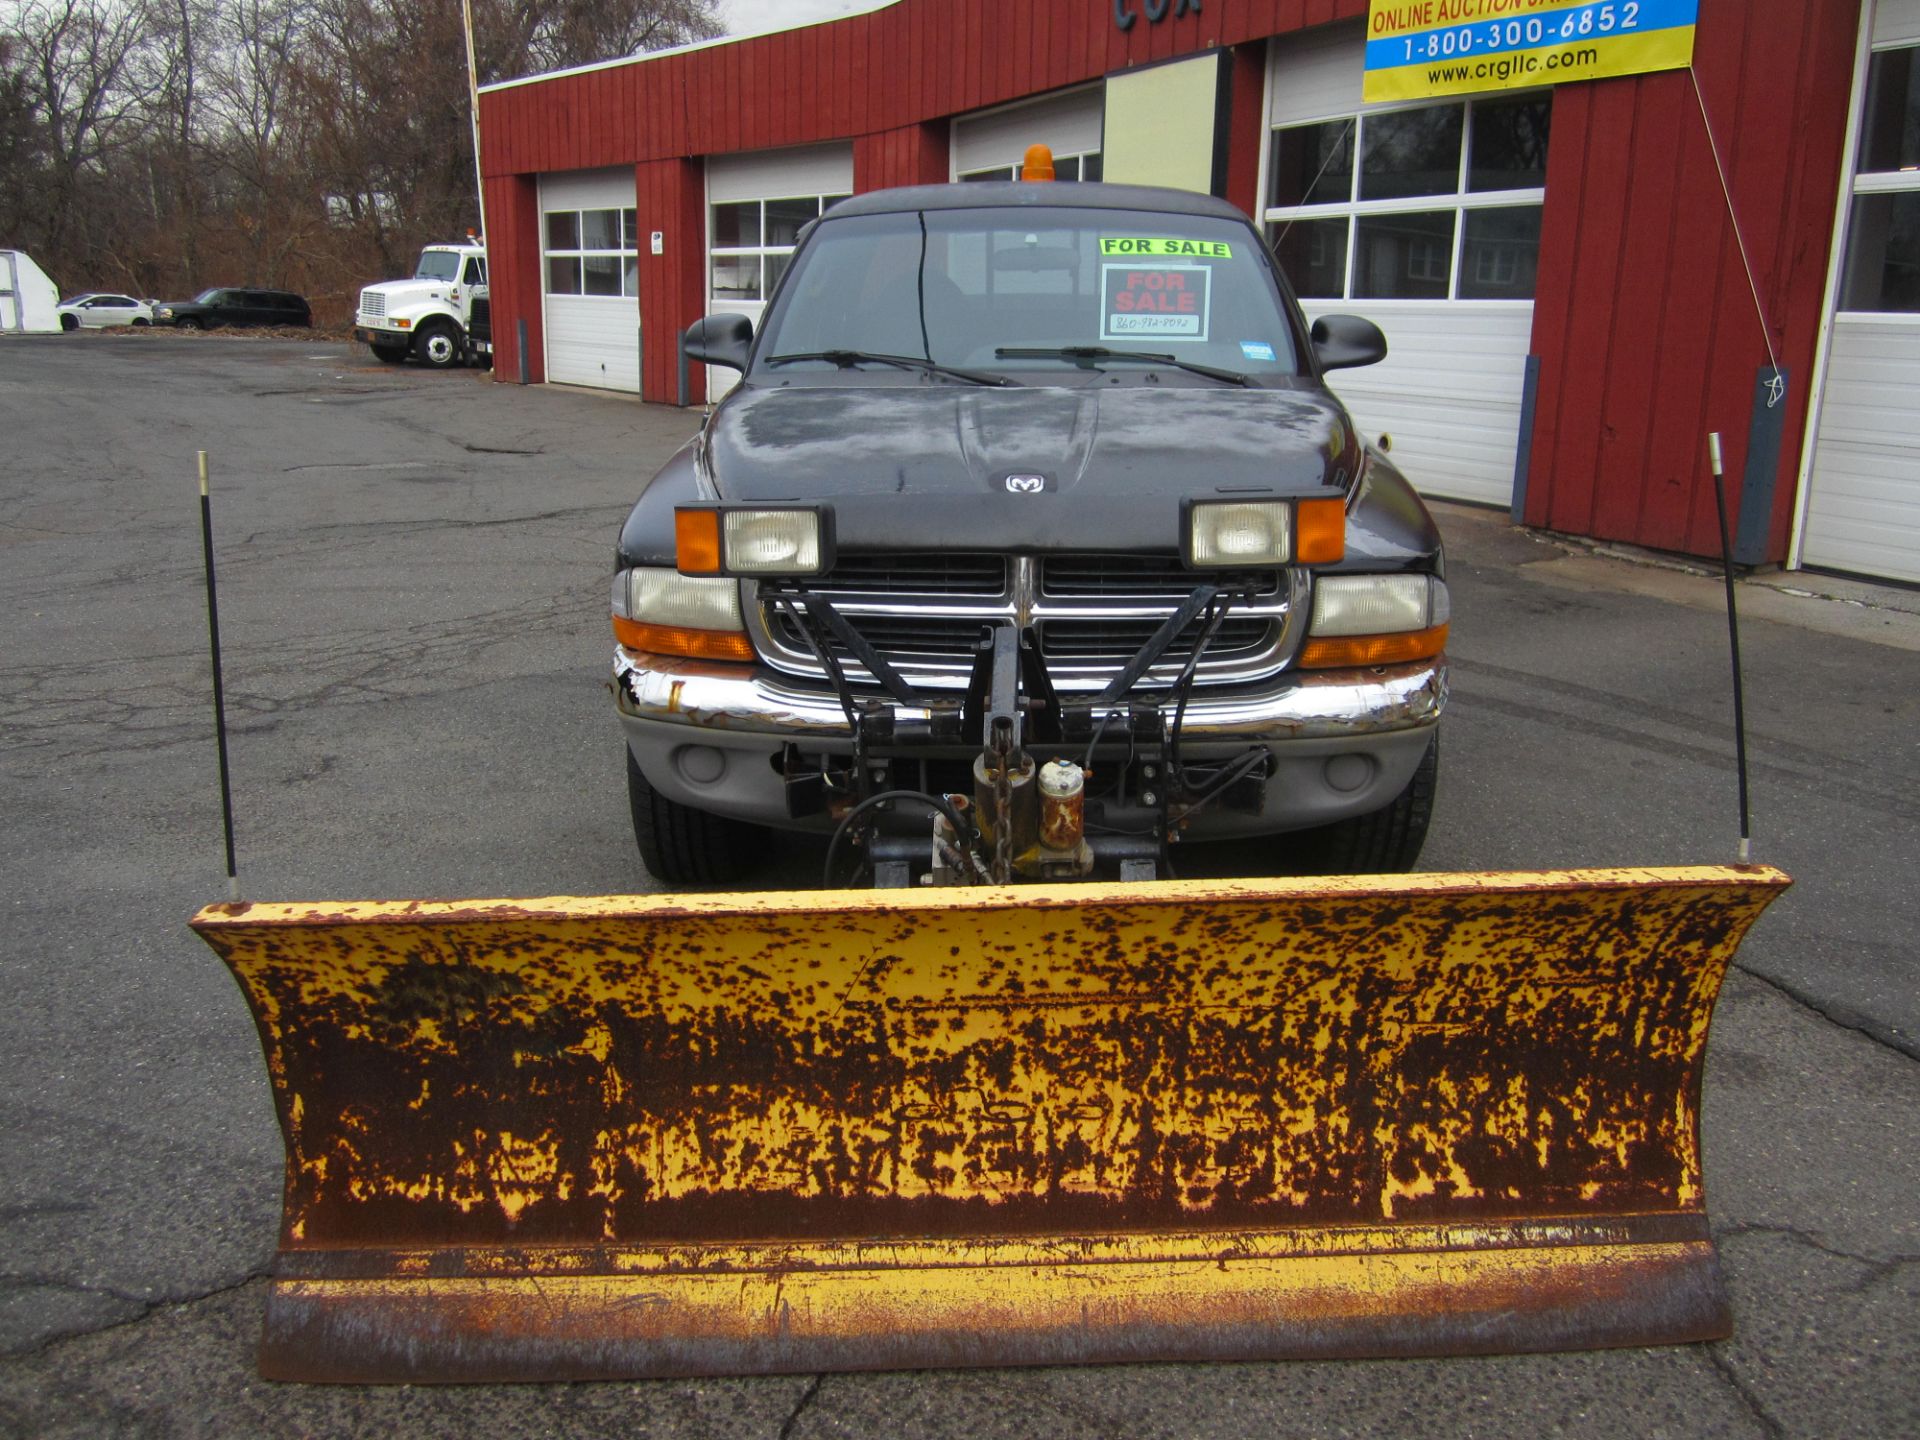 1999 Dodge Dakota SLT, 4X4, 6 cylinder, AT, power windows, A/C, (4) new tires, plow included - Image 3 of 6